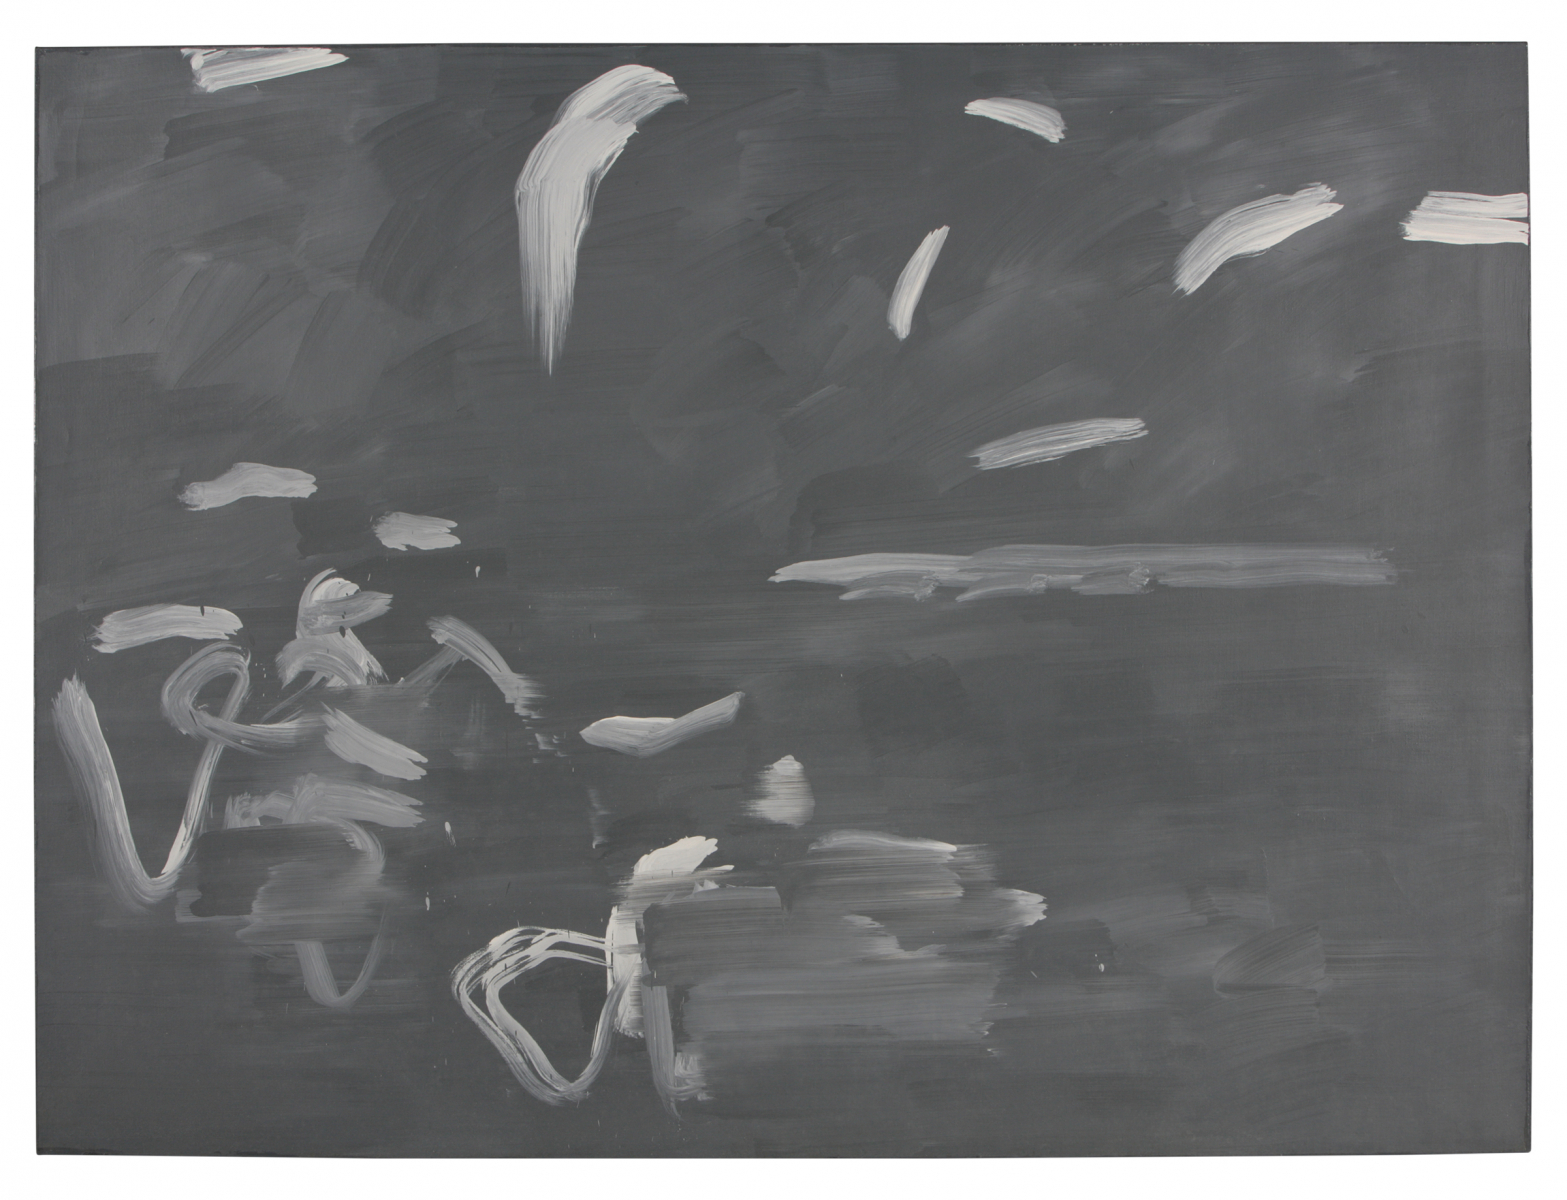 From a River-99218, 1999, Oil on Canvas, 194x259cm